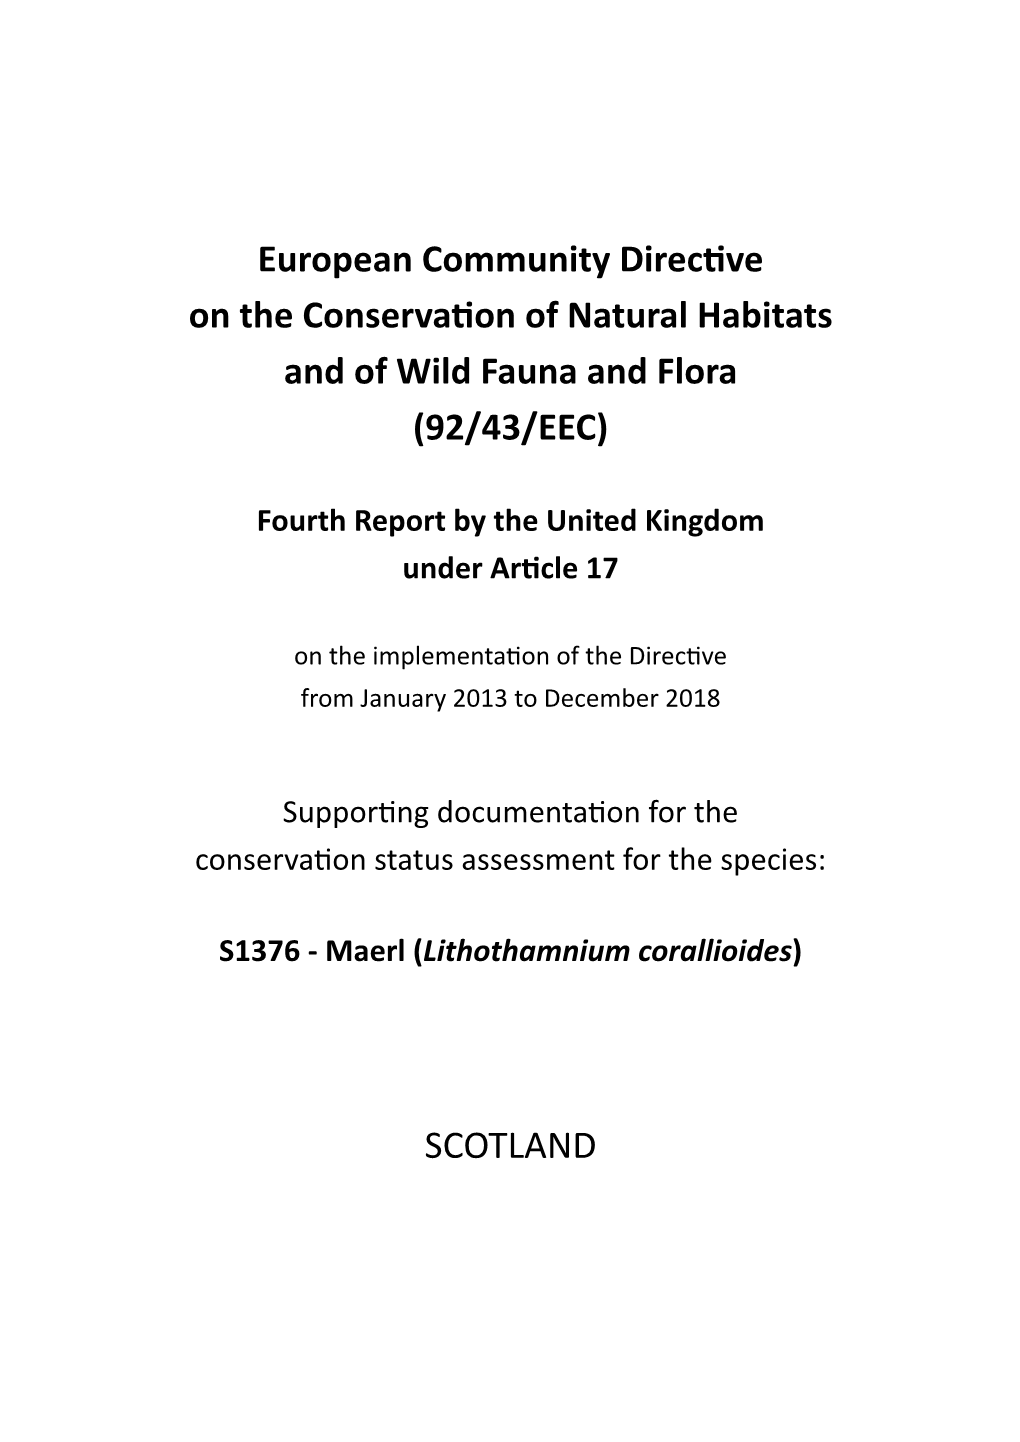 Scotland Information for S1376